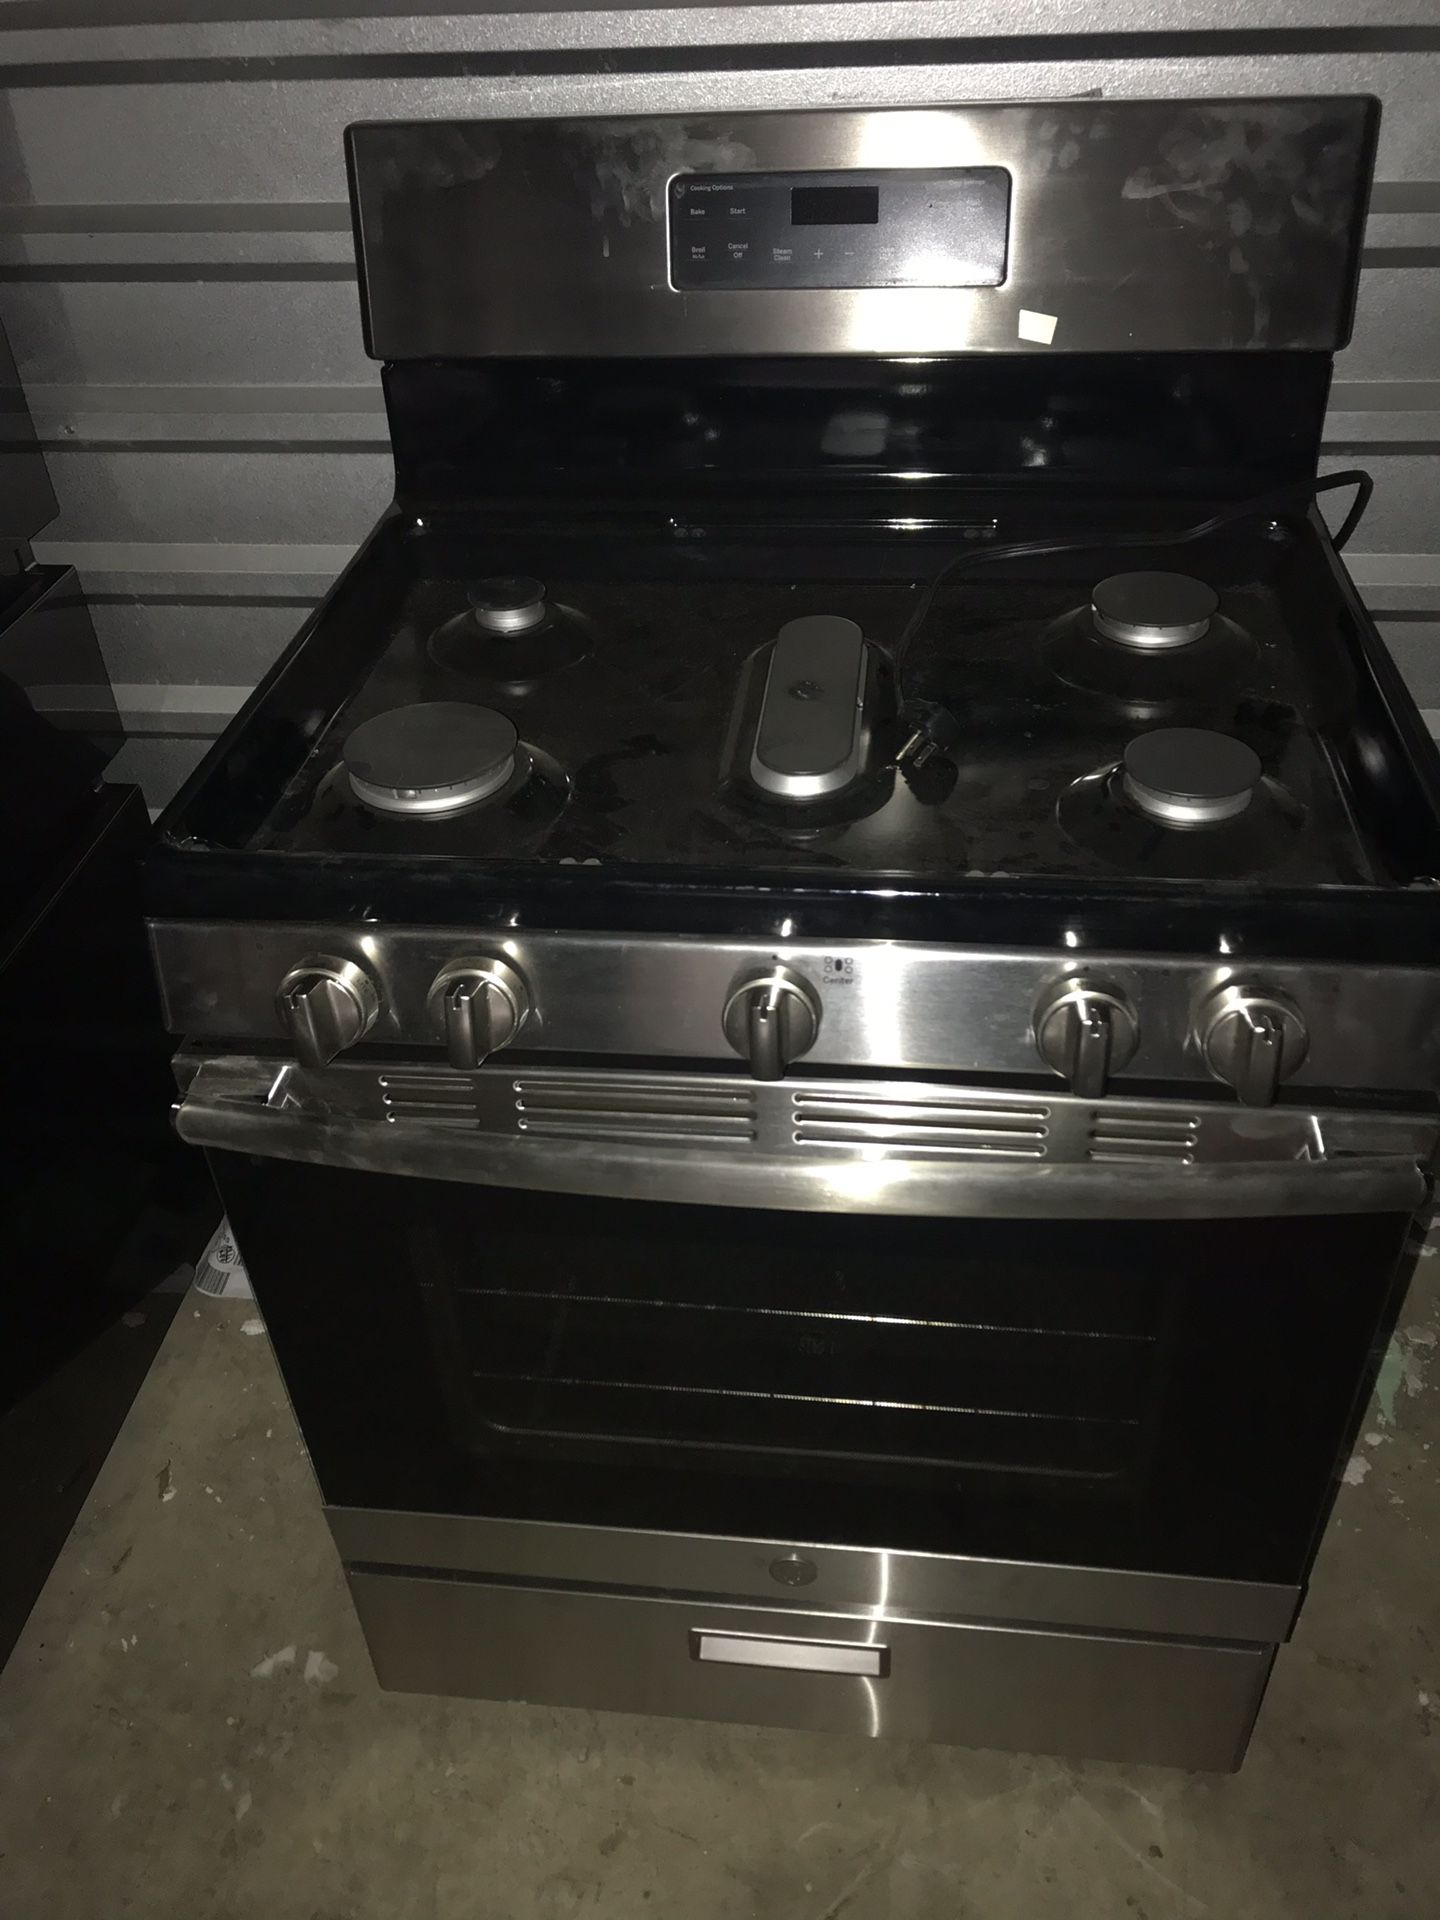 GE Stainless steel set Refrigerator, Stove, dishwasher and microwave